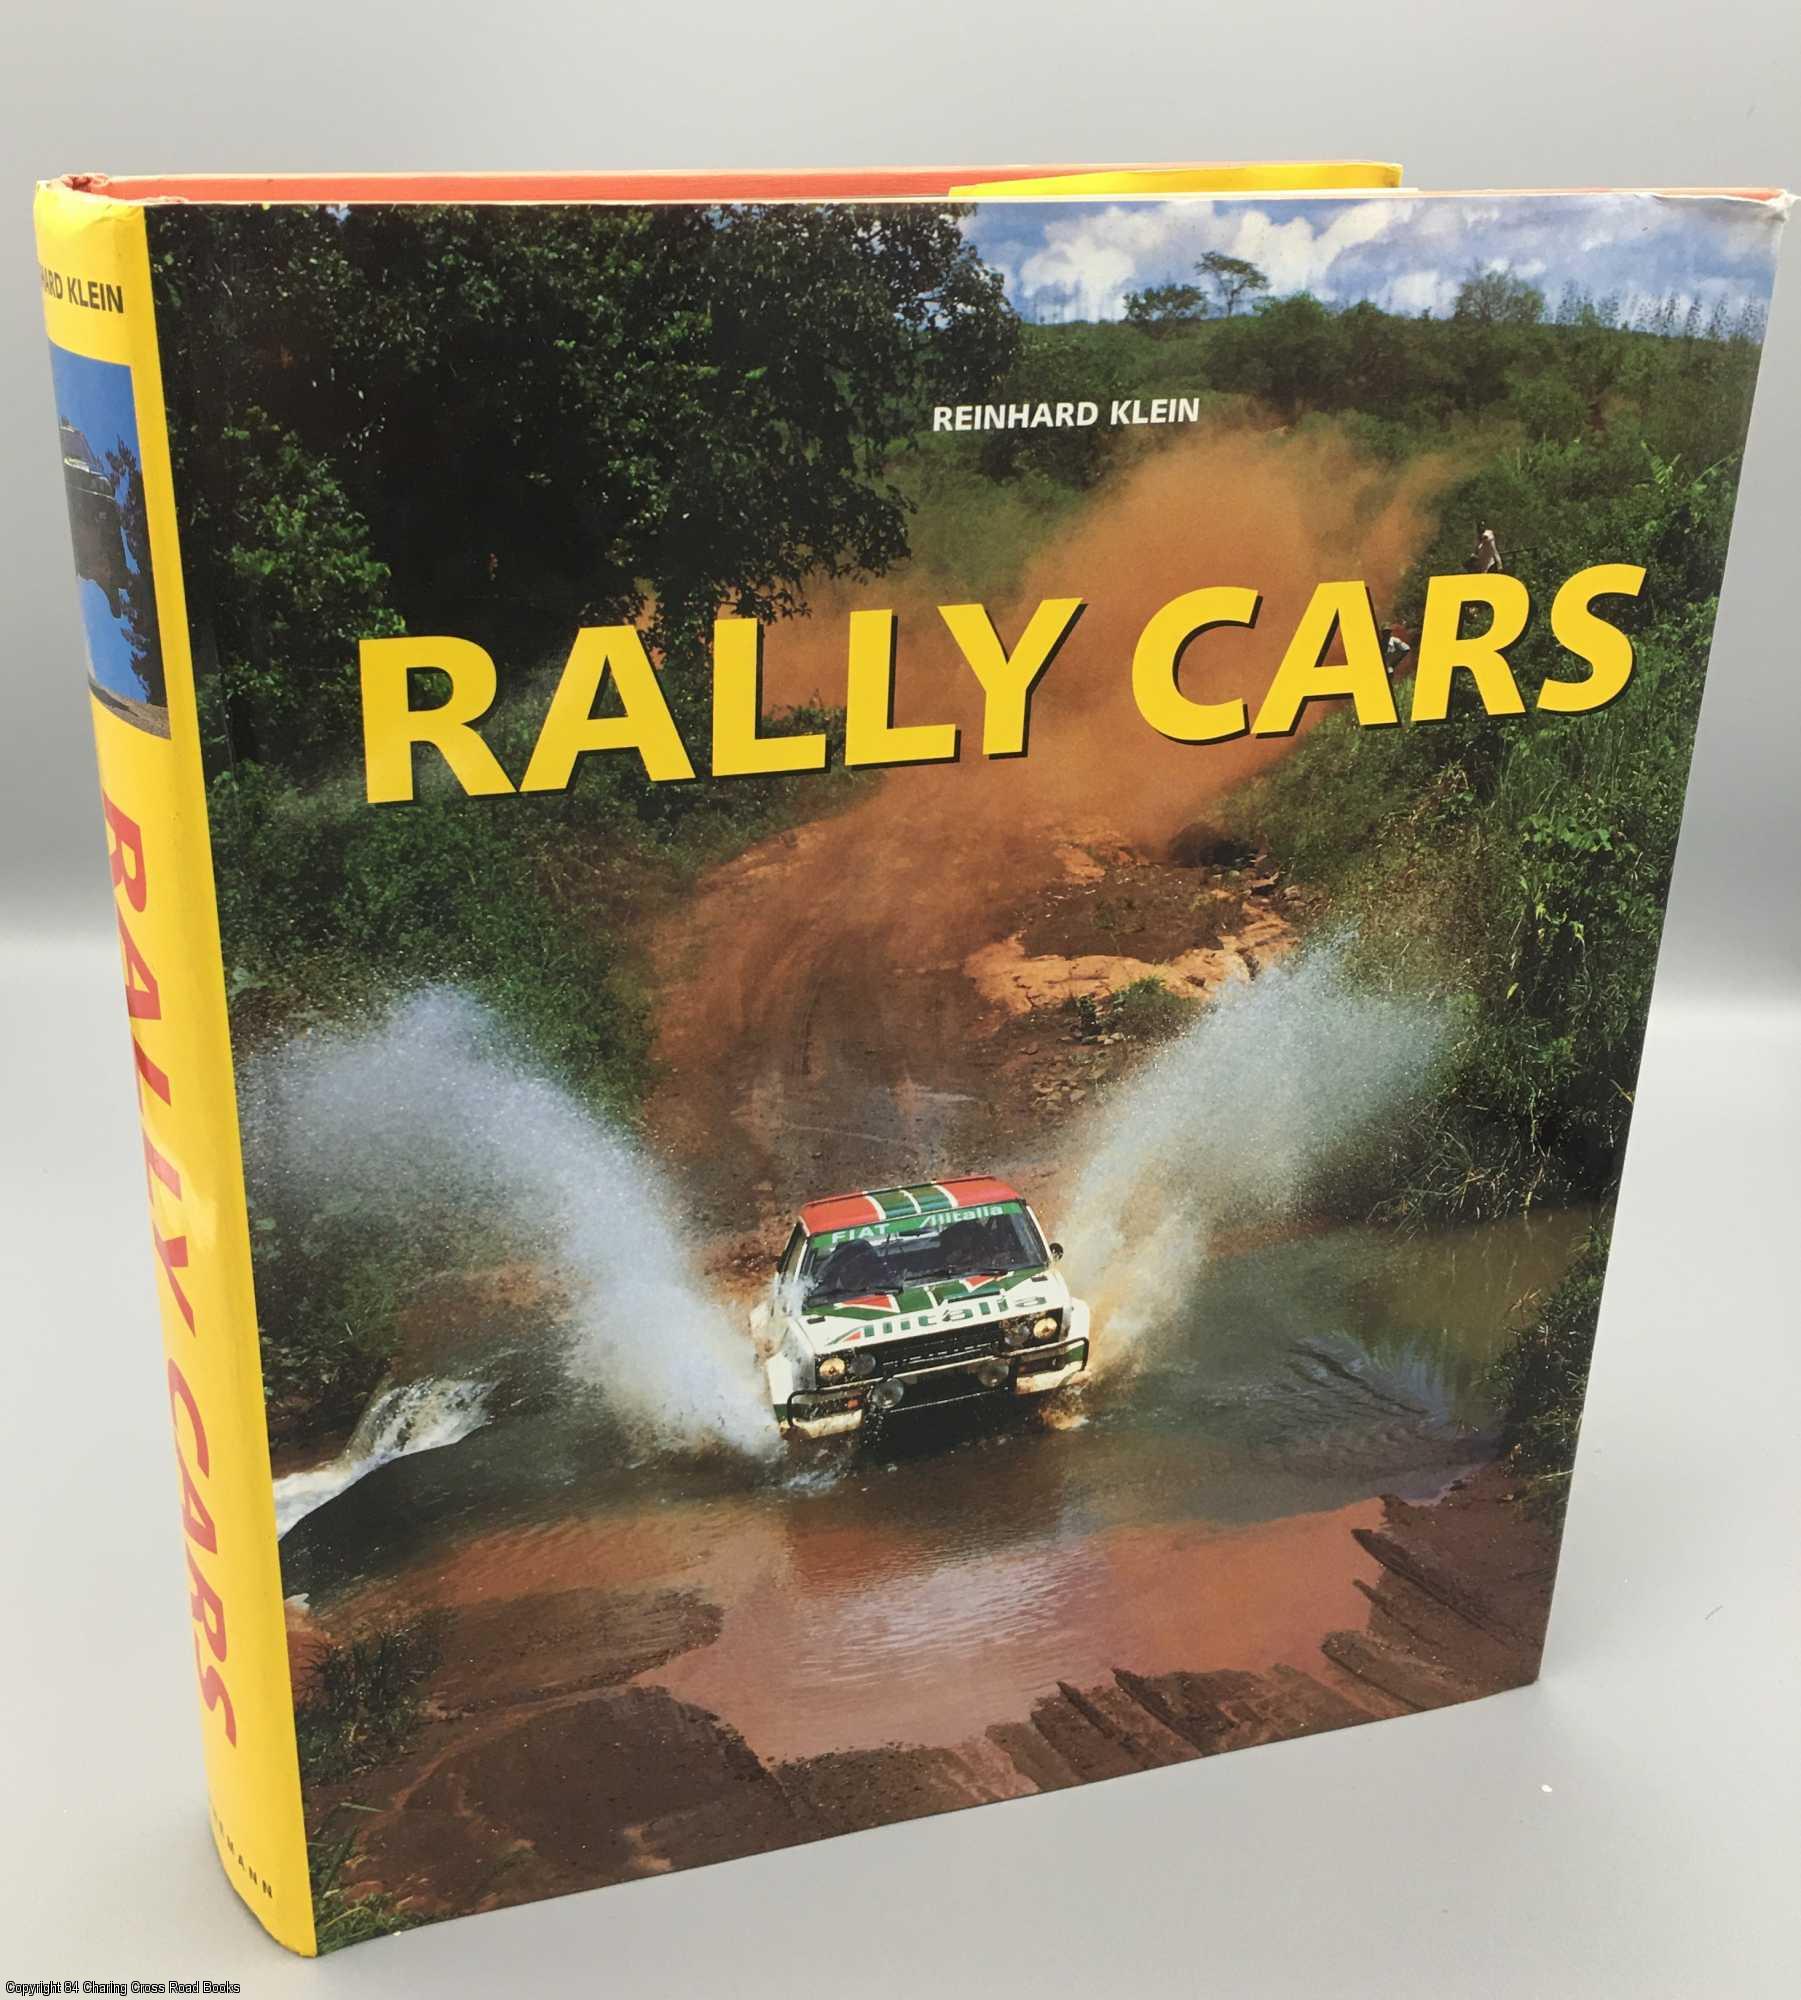 Rally Cars by Reinhard Klein on 84 Charing Cross Rare Books